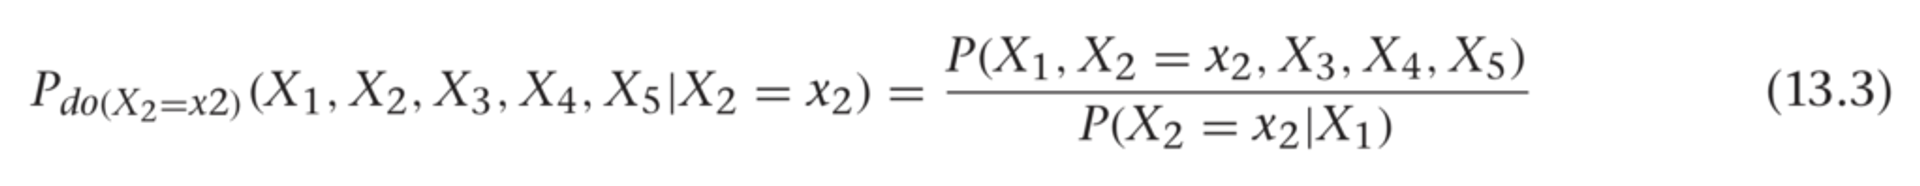 Precise conditioning of X2 distribution